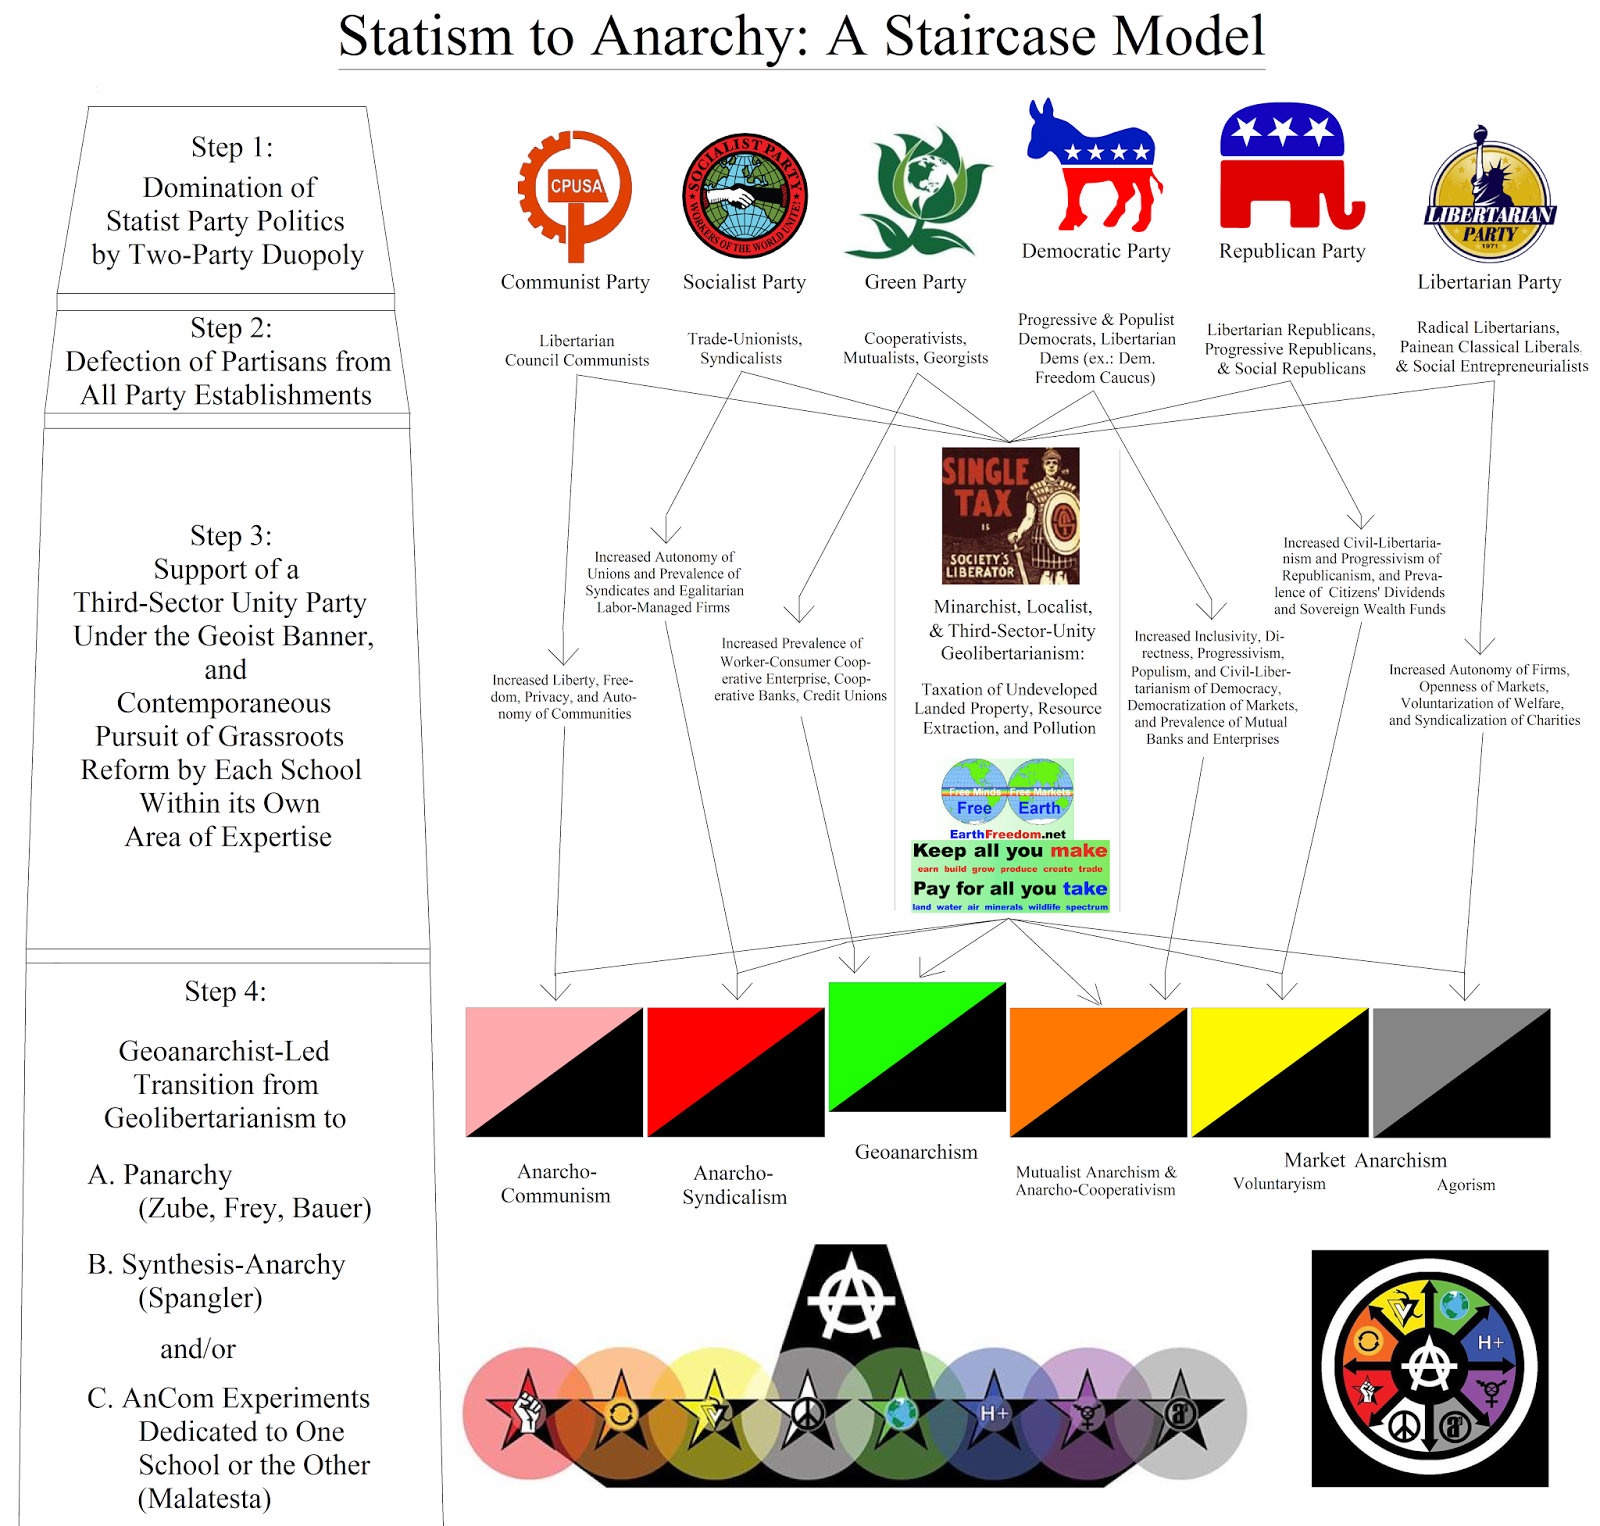 The Aquarian Agrarian Statism To Anarchy A Staircase Model